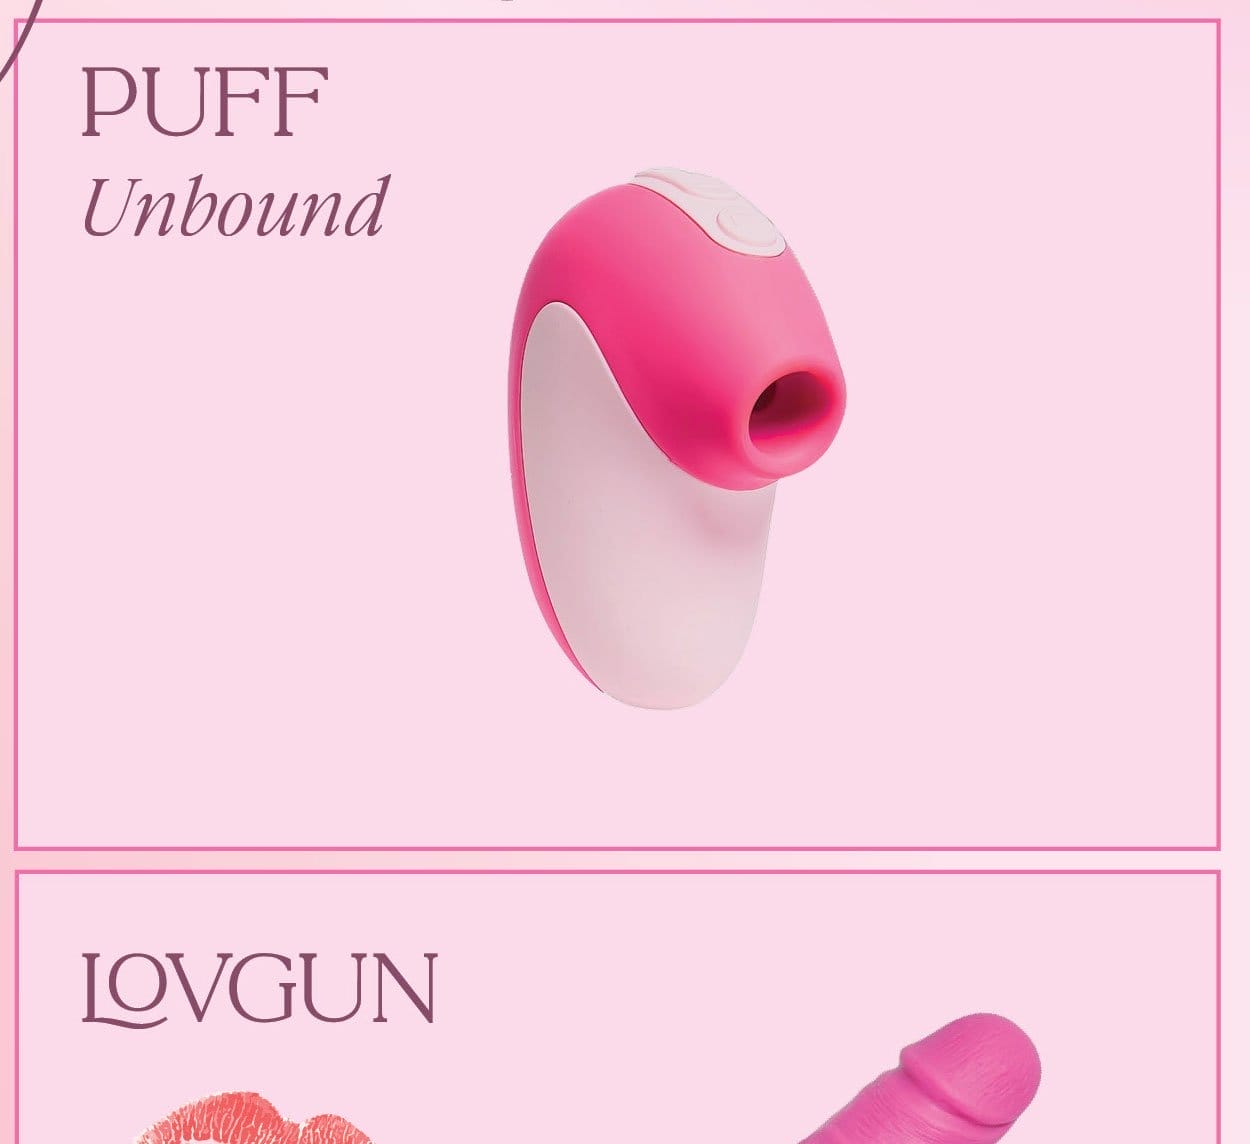 Puff Suction Toy by Unbound